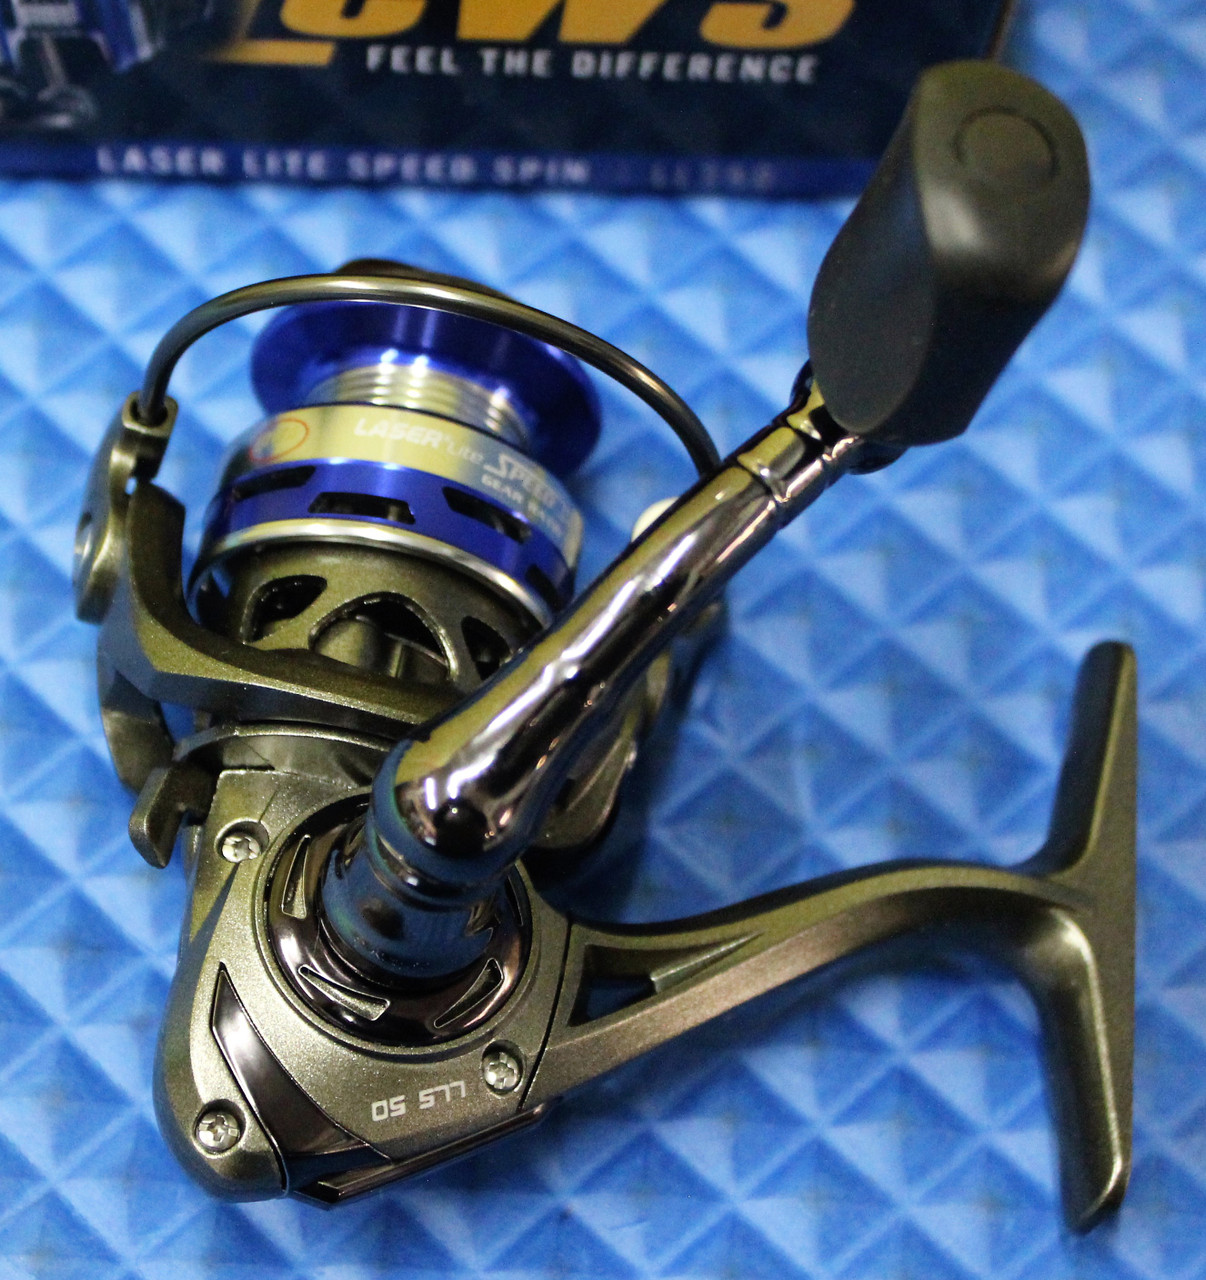 Lew's Laser Lite Speed Spin Spinning Series Reels LLS CHOOSE YOUR MODEL!